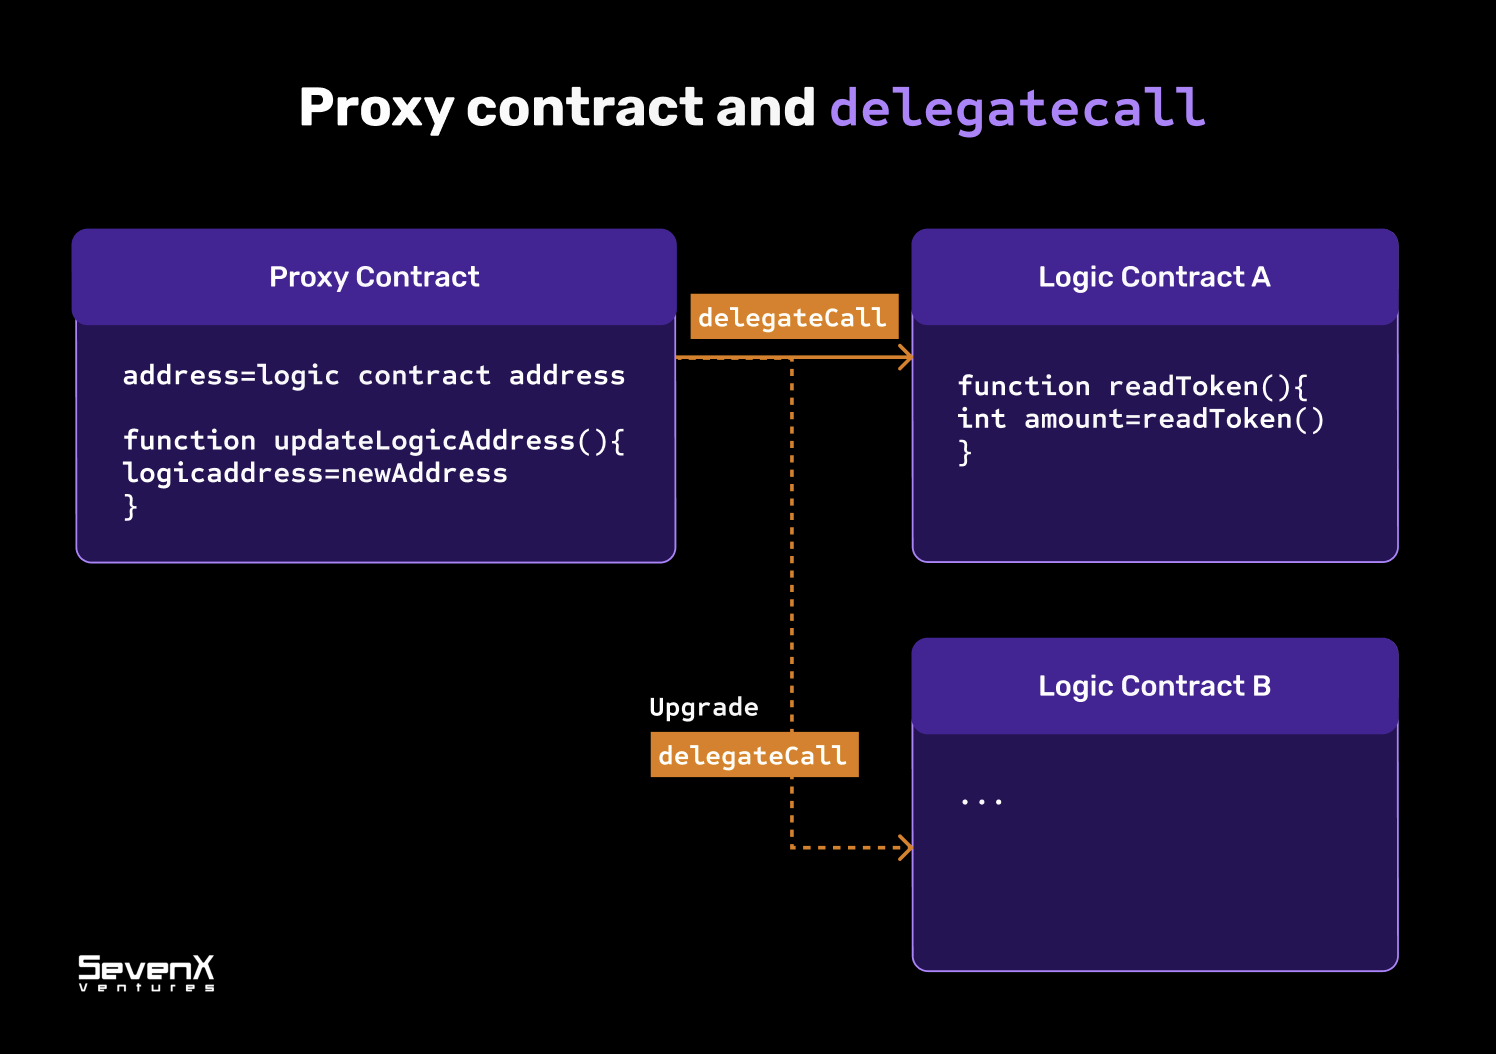 Proxy contract and delegateCall